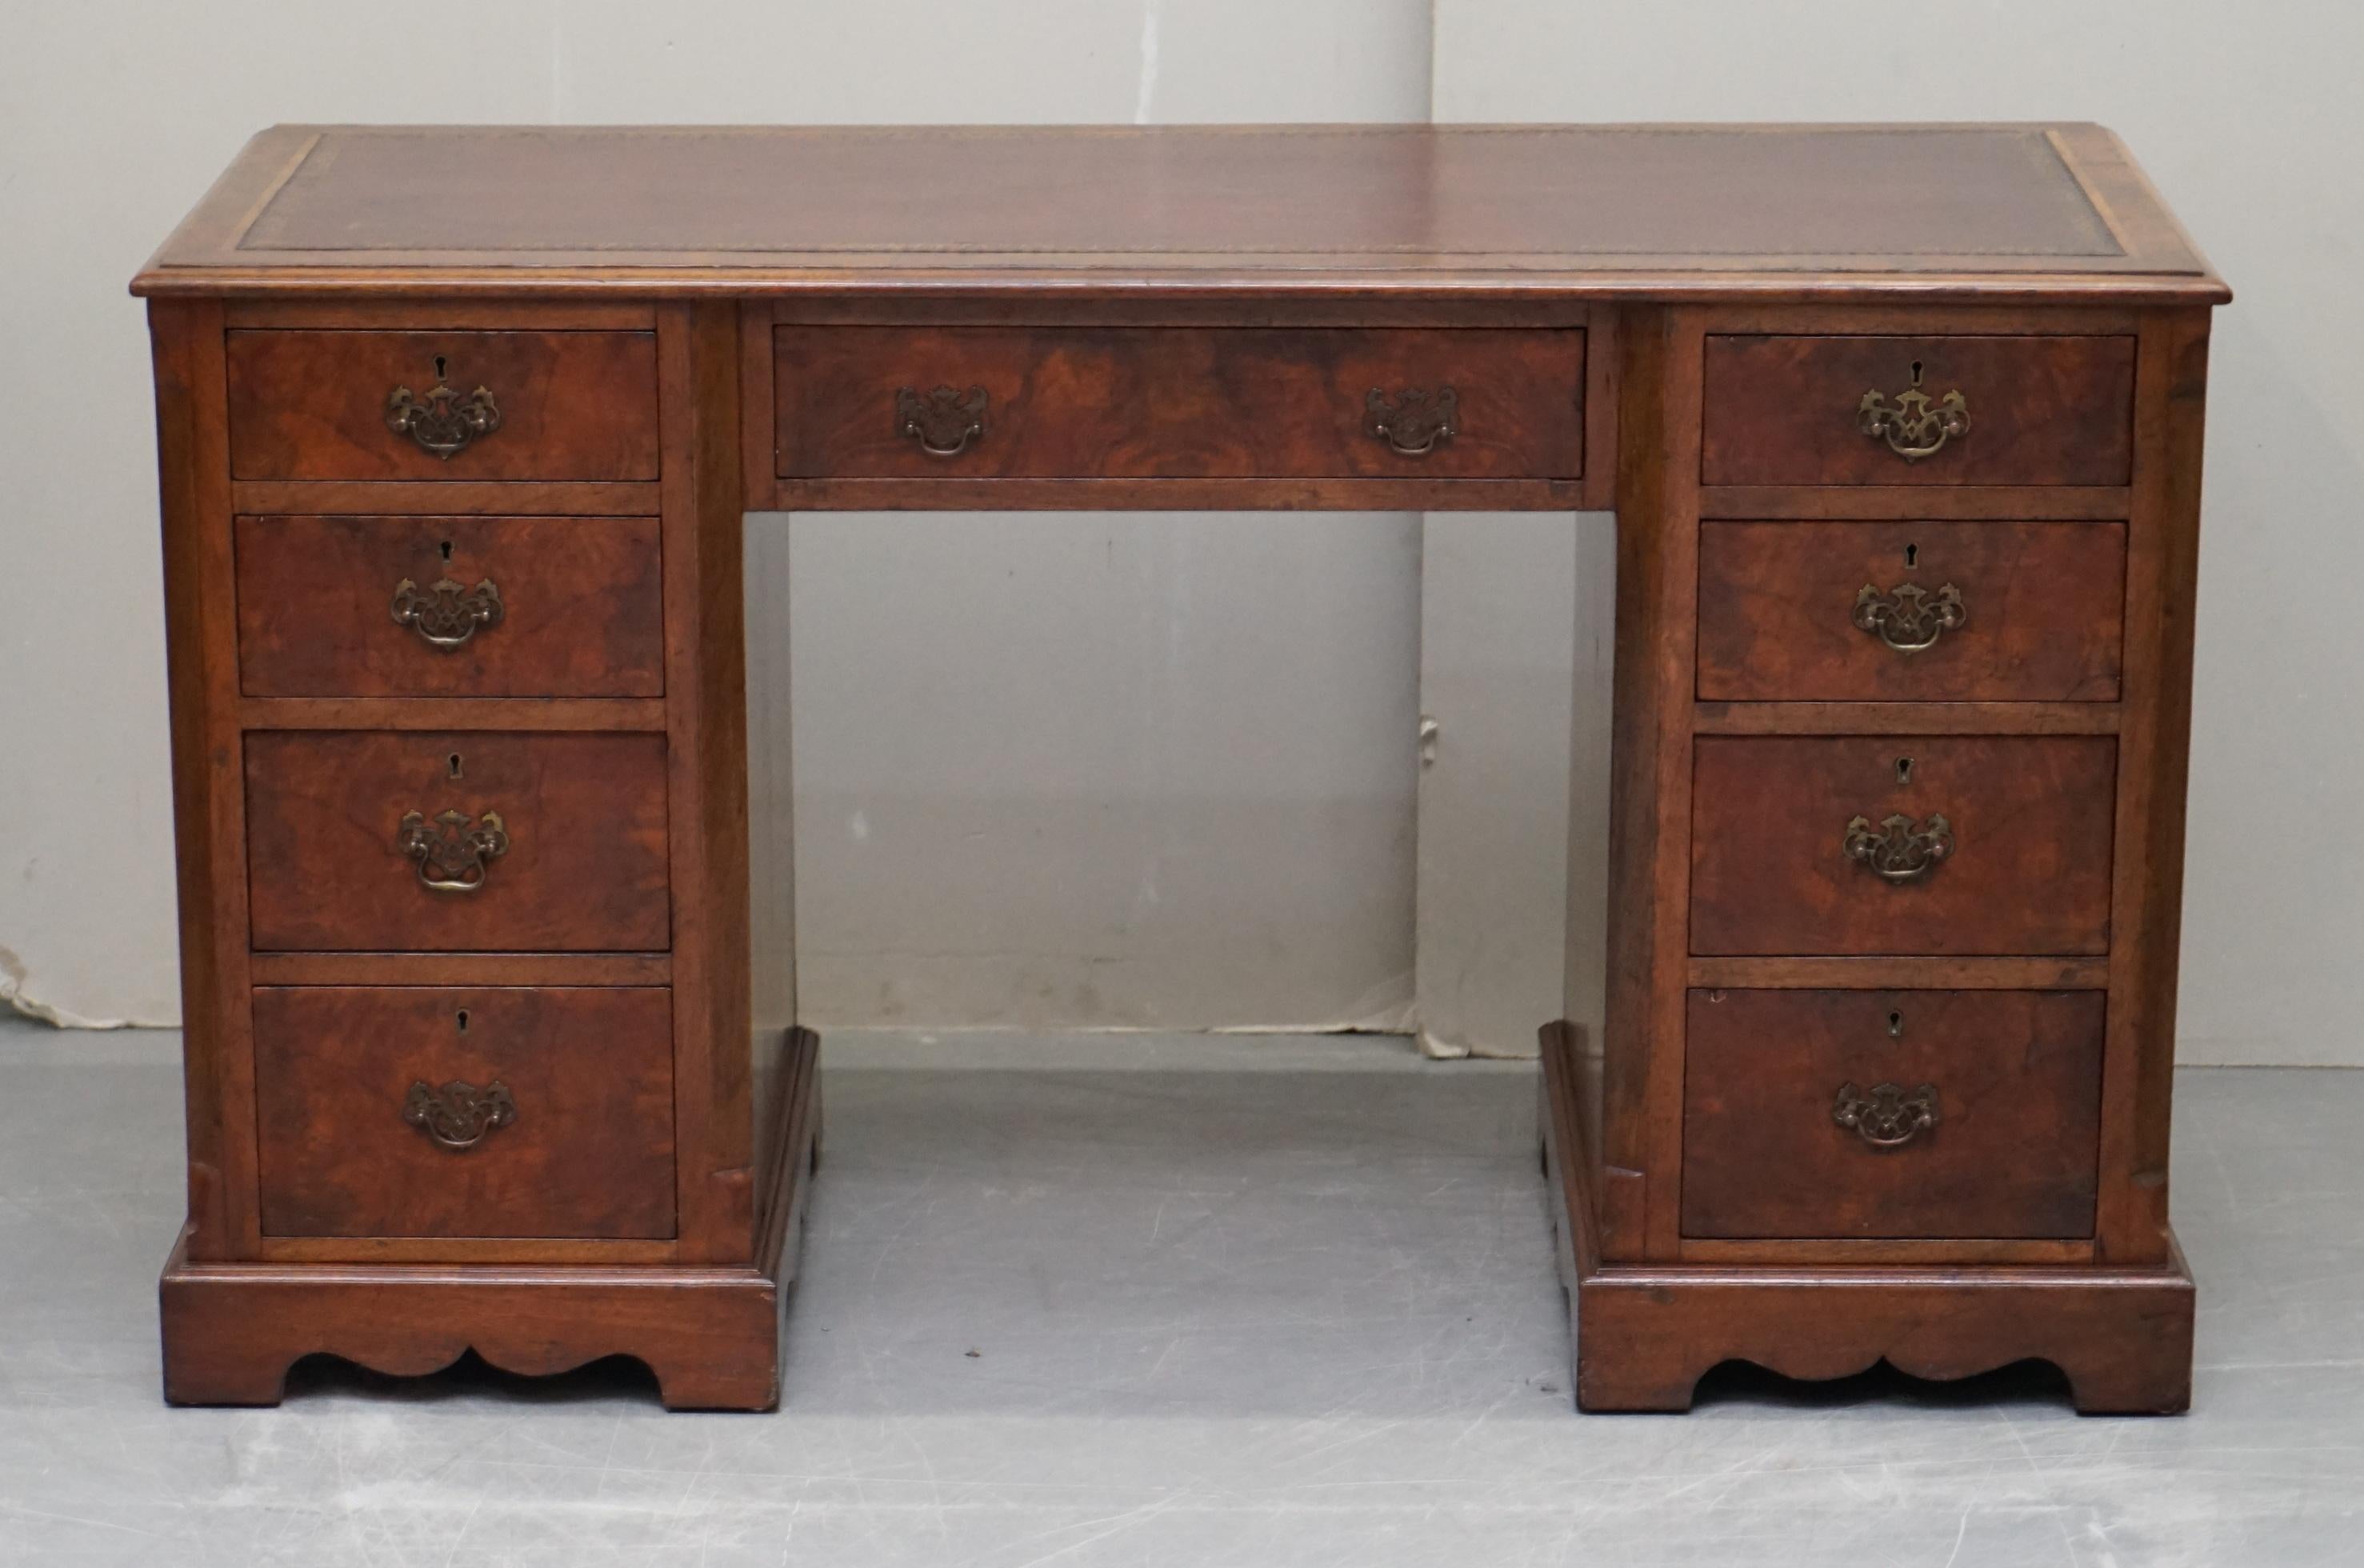 We are delighted to offer for sale this lovely handmade in England circa 1880 burr walnut and brown leather twin pedestal partner desk

A good looking and well made desk, the timber patina is glorious as is the brown leather top which is a thick